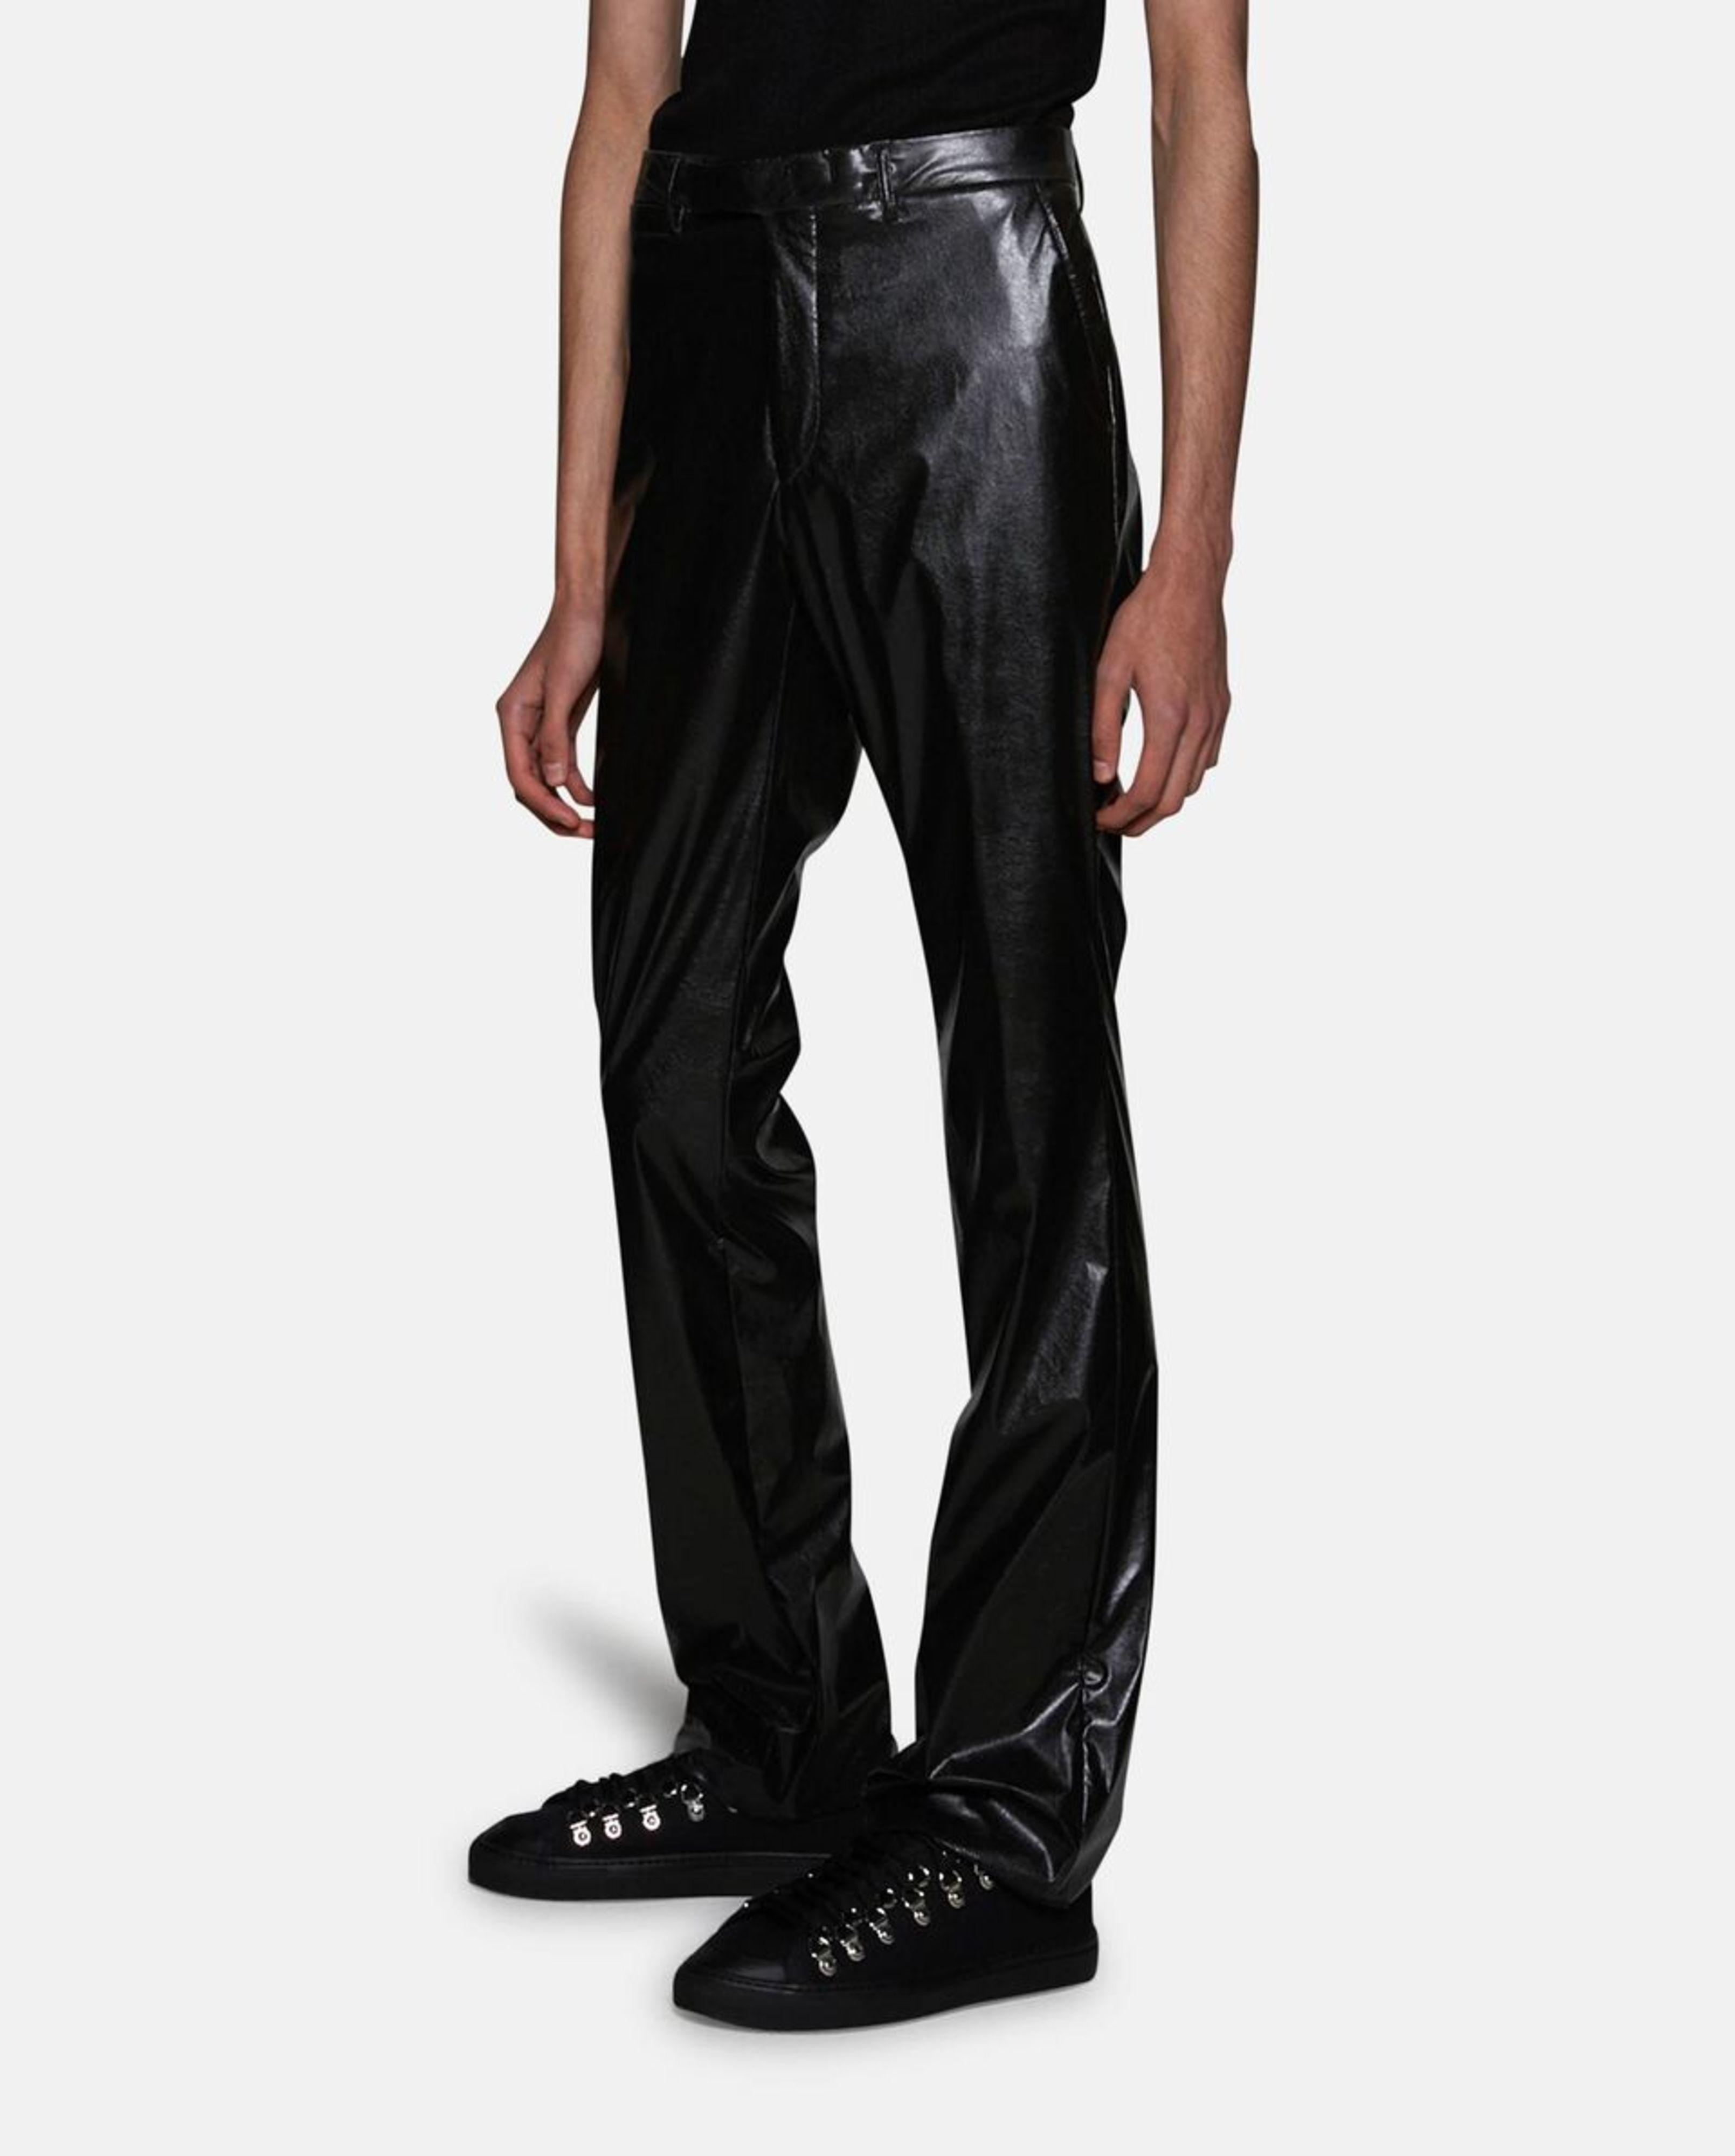 Raf Simons Slightly Flary Fake Leather Pants in Black - Lyst